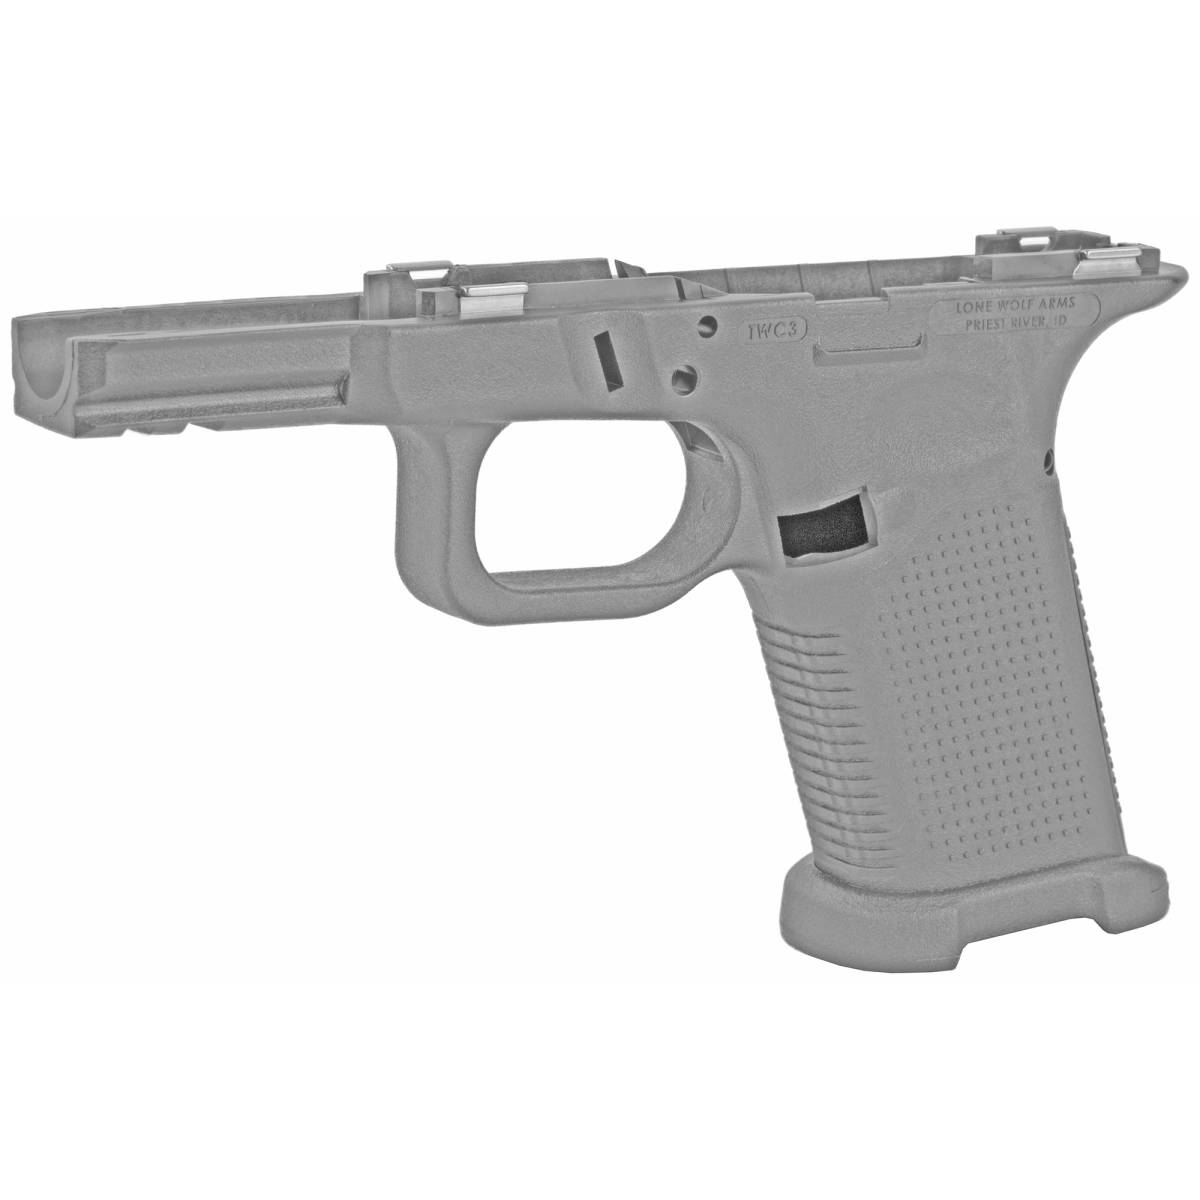 LWD BARE TW CMP FRAME AND GRIP GRY-img-2